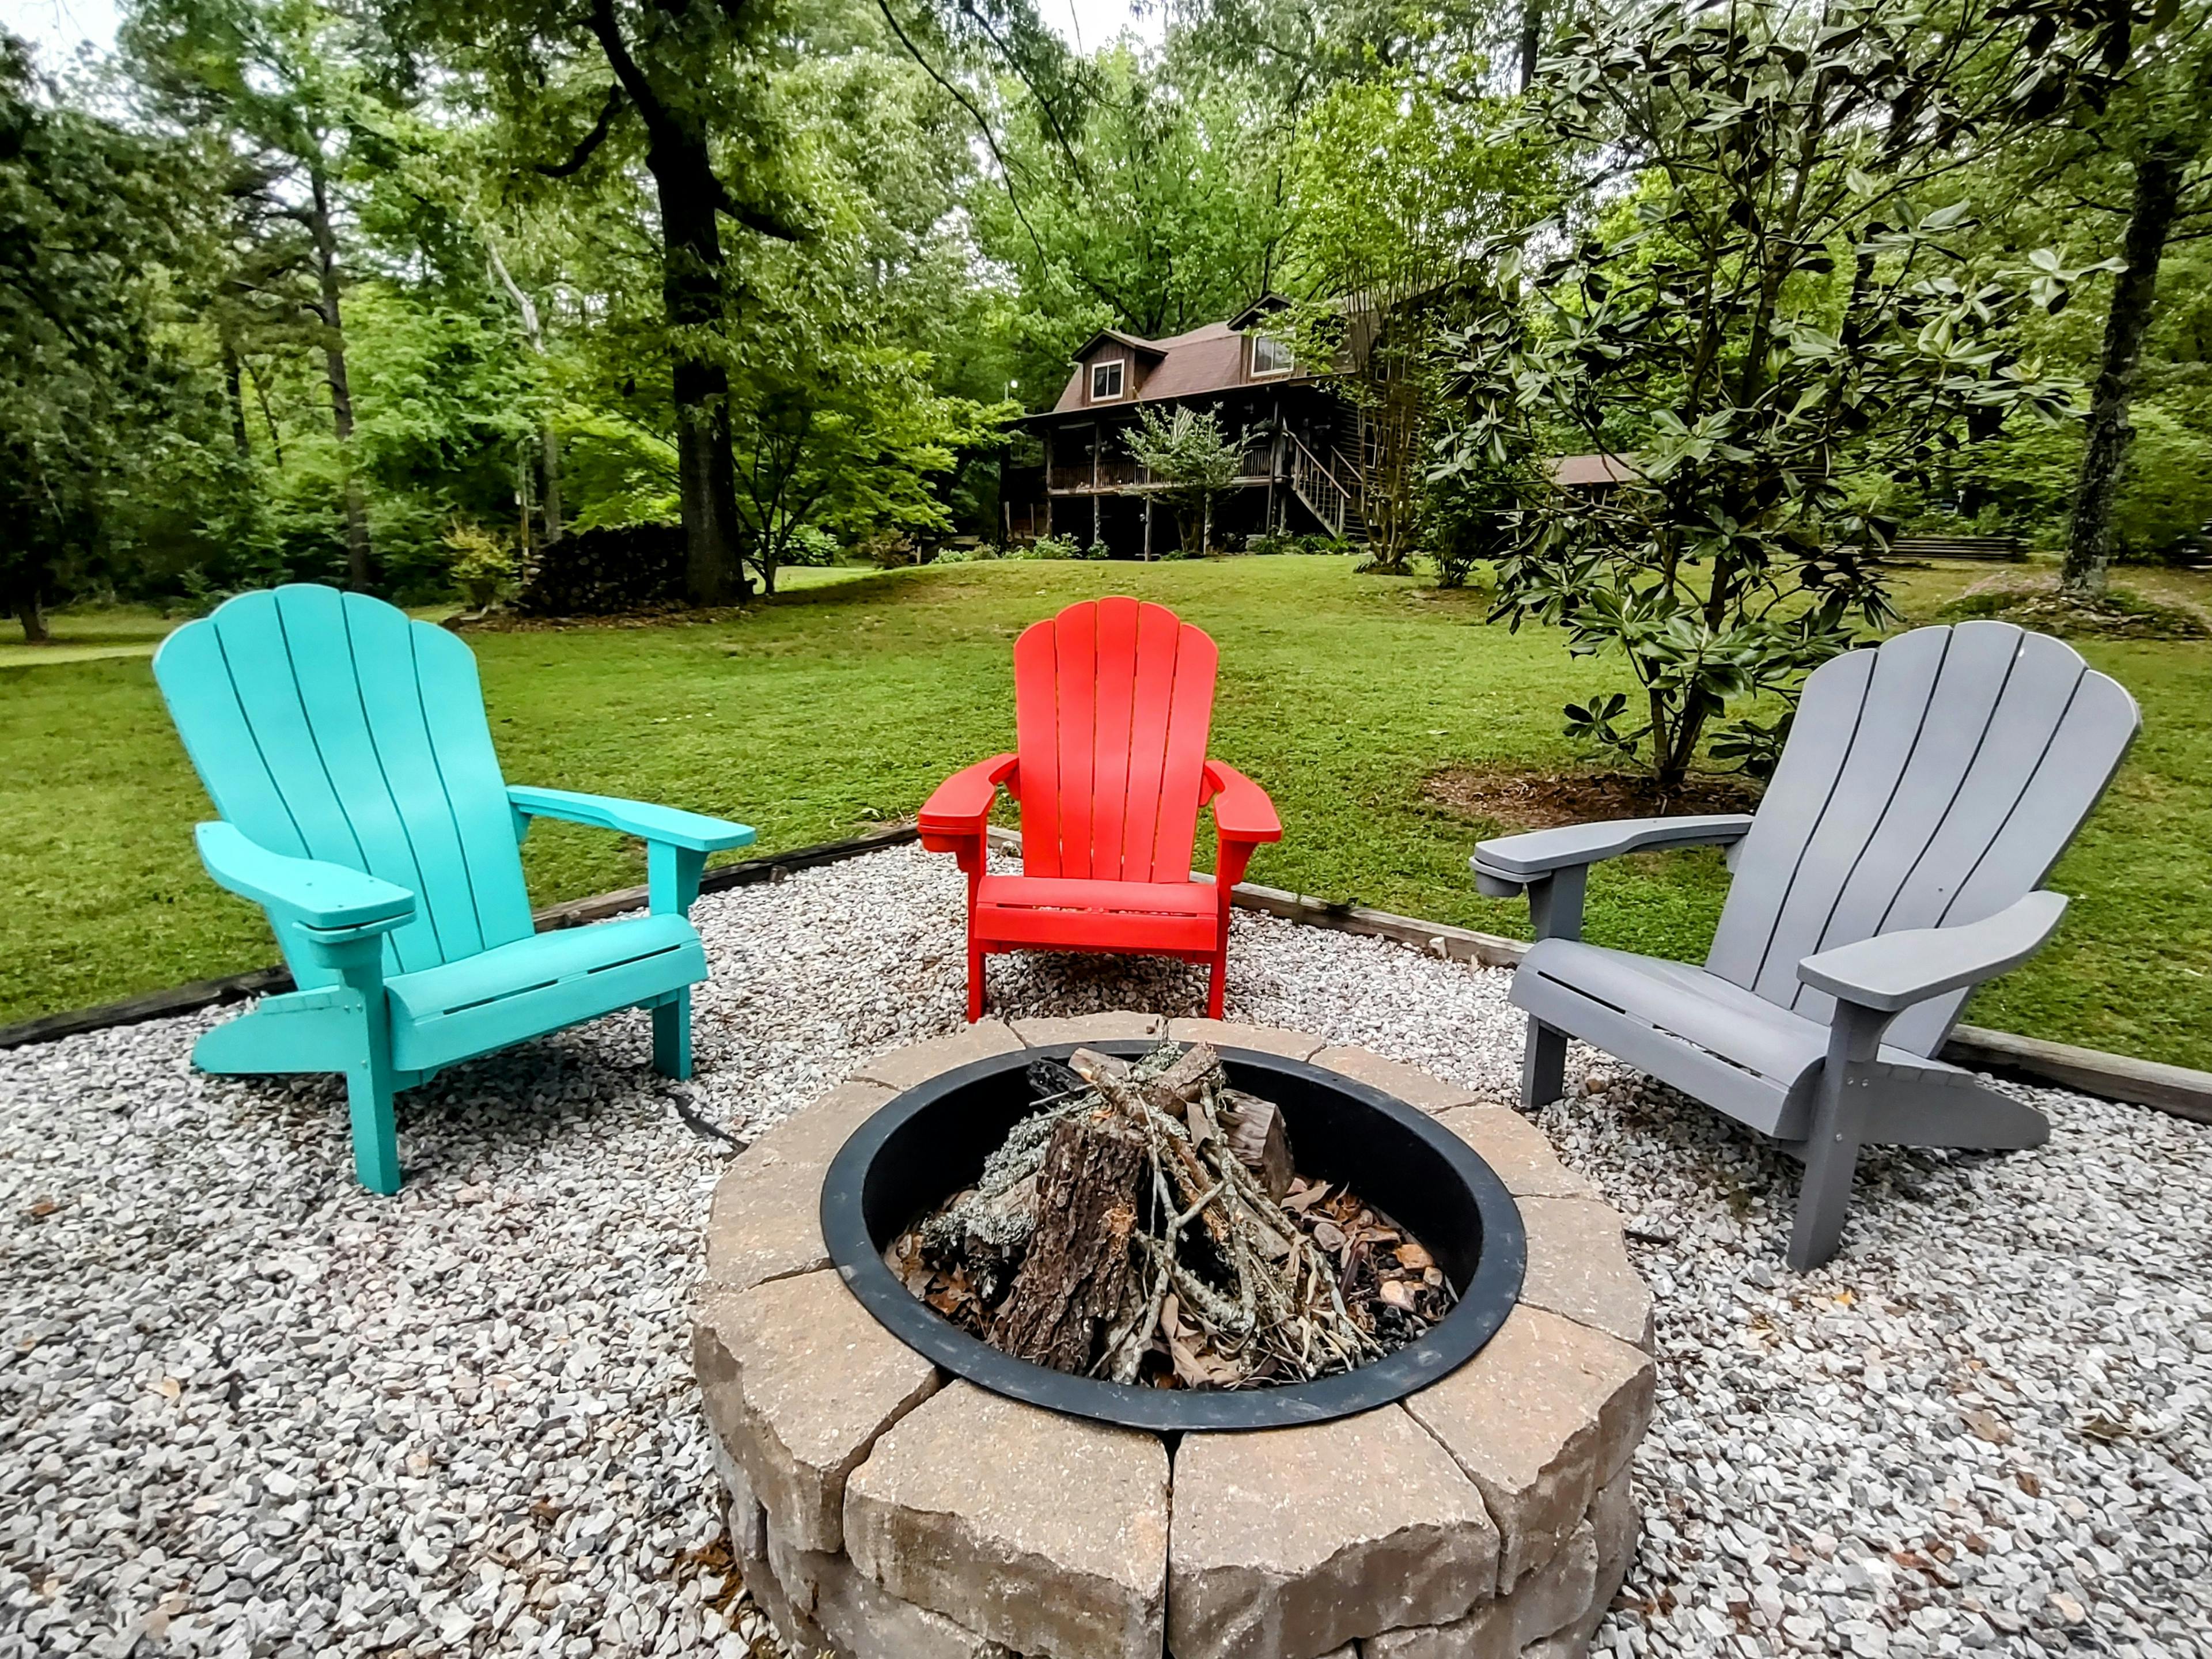 Green, red and gray adirondack chairs around a fire pit in front of a grassy yard with a log house in the background